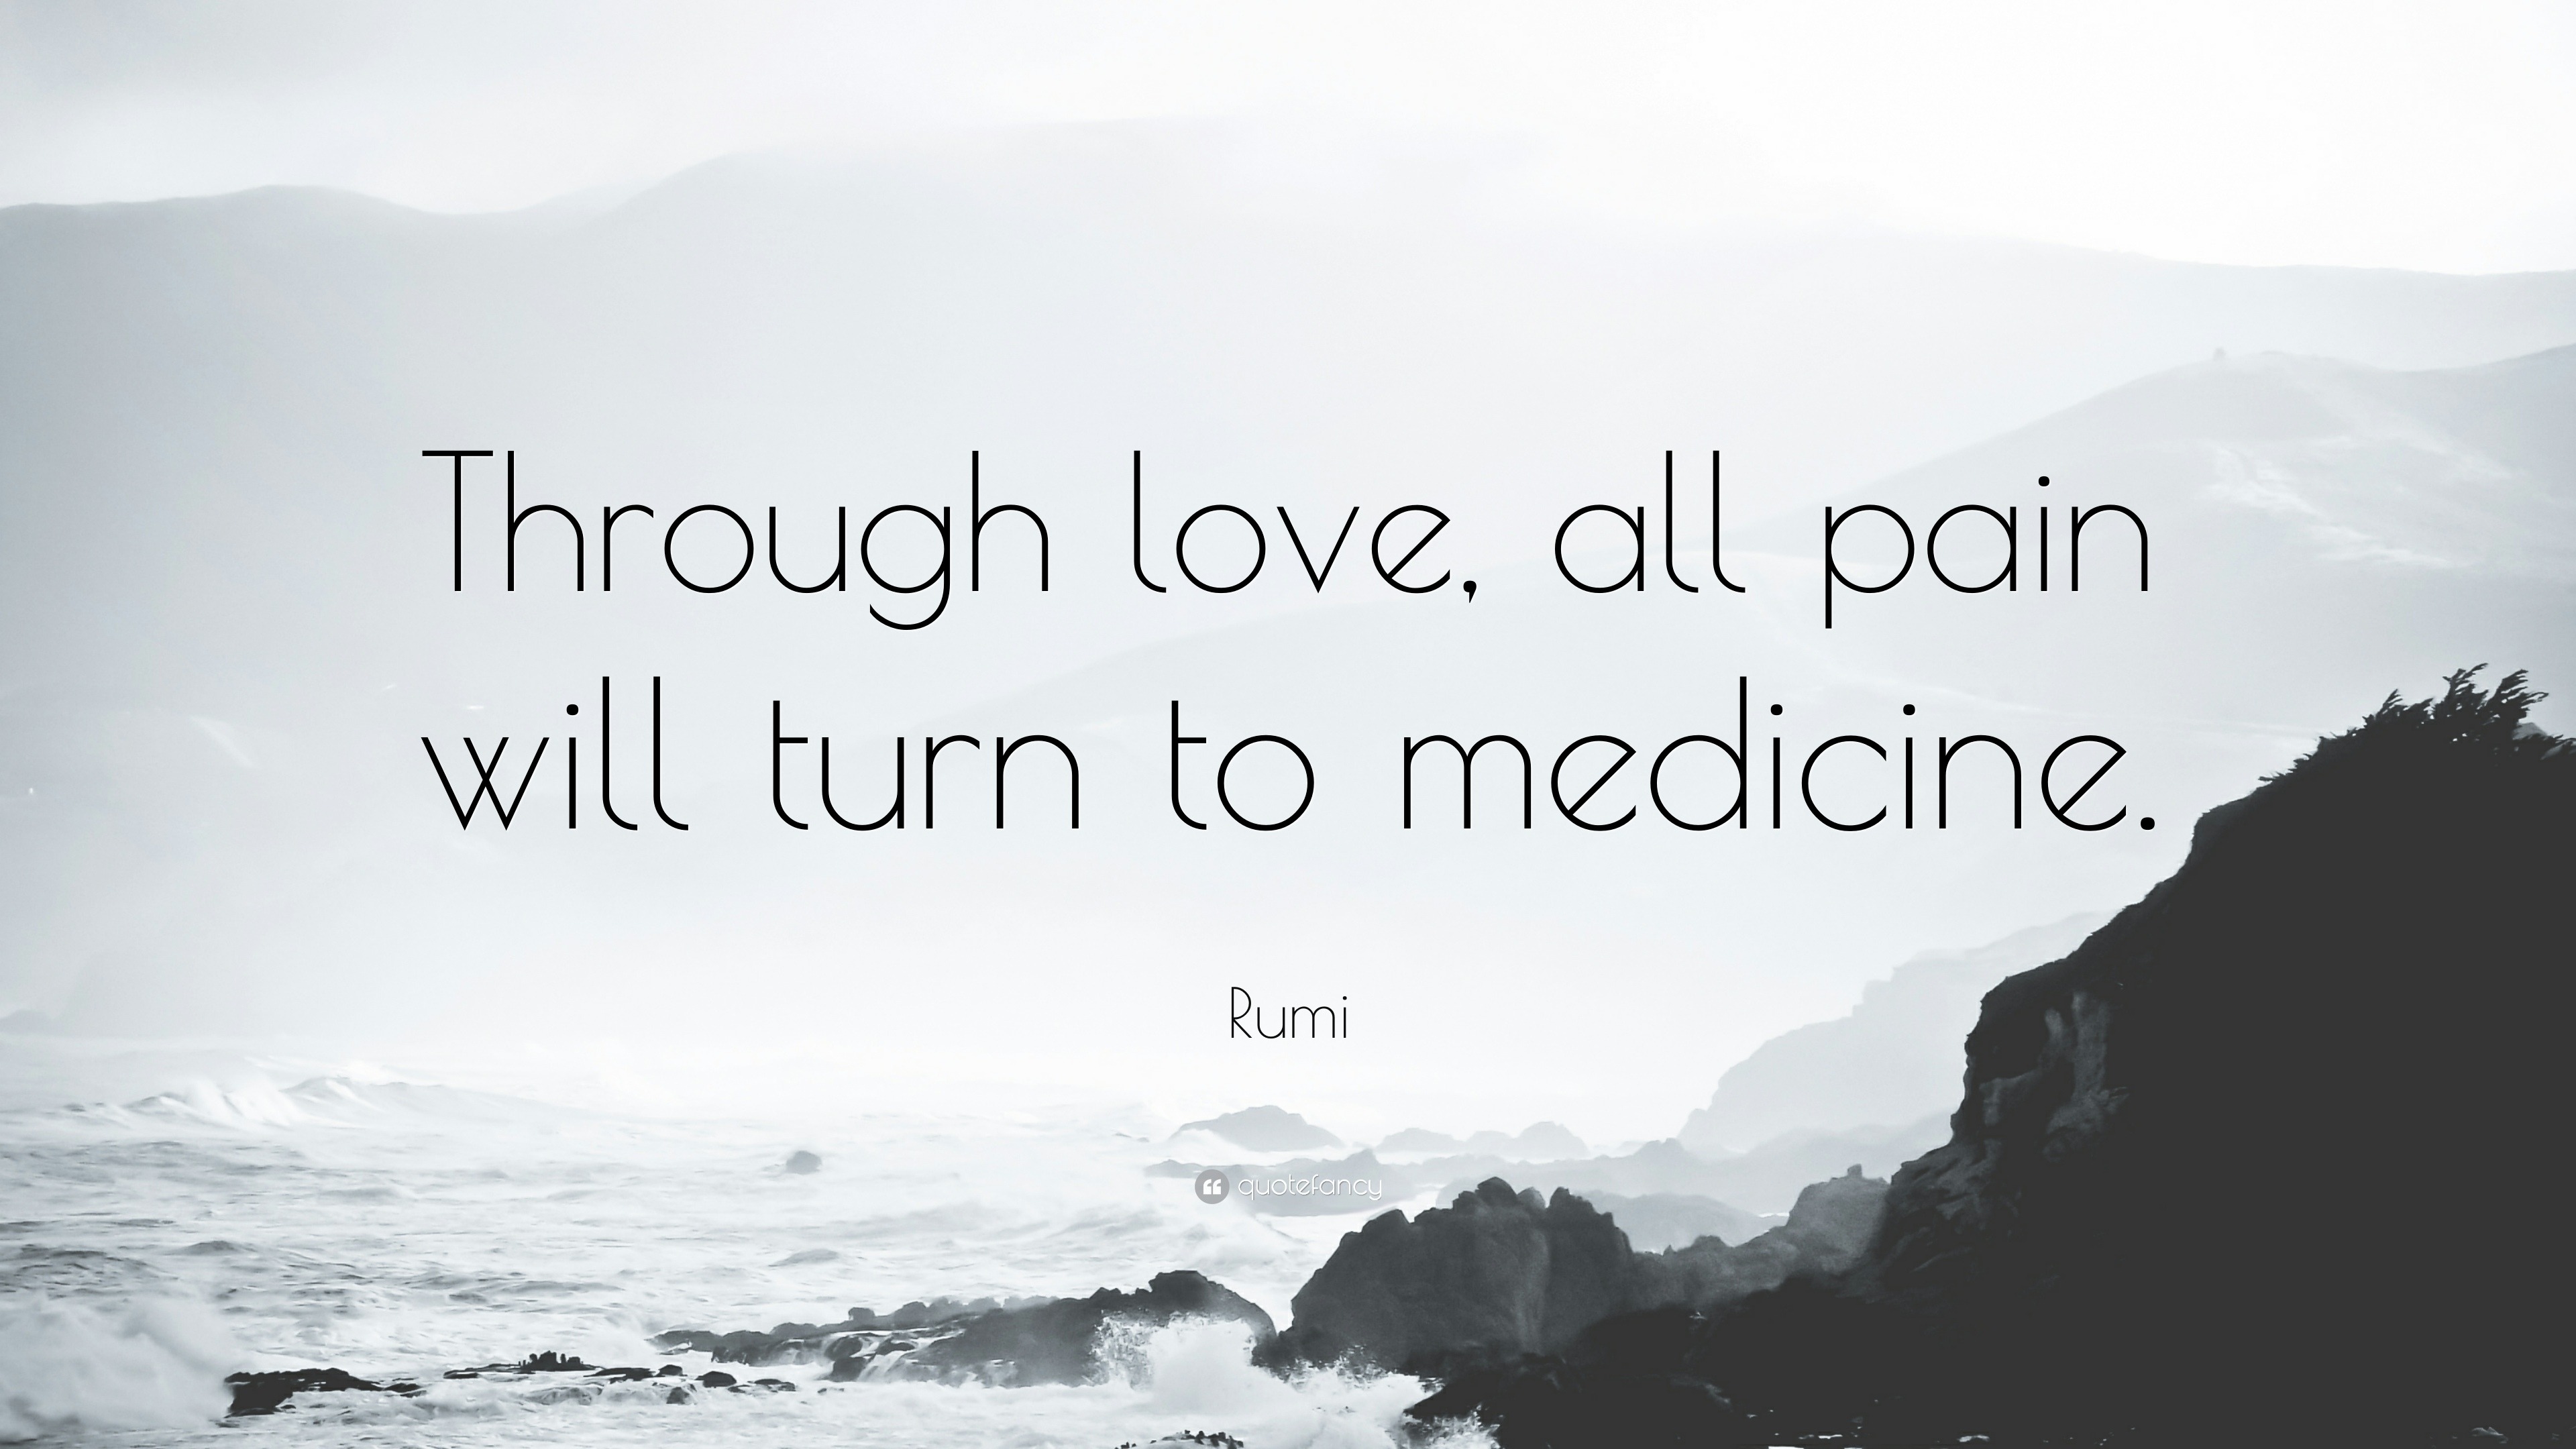 Rumi Quote “Through love all pain will turn to medicine ”